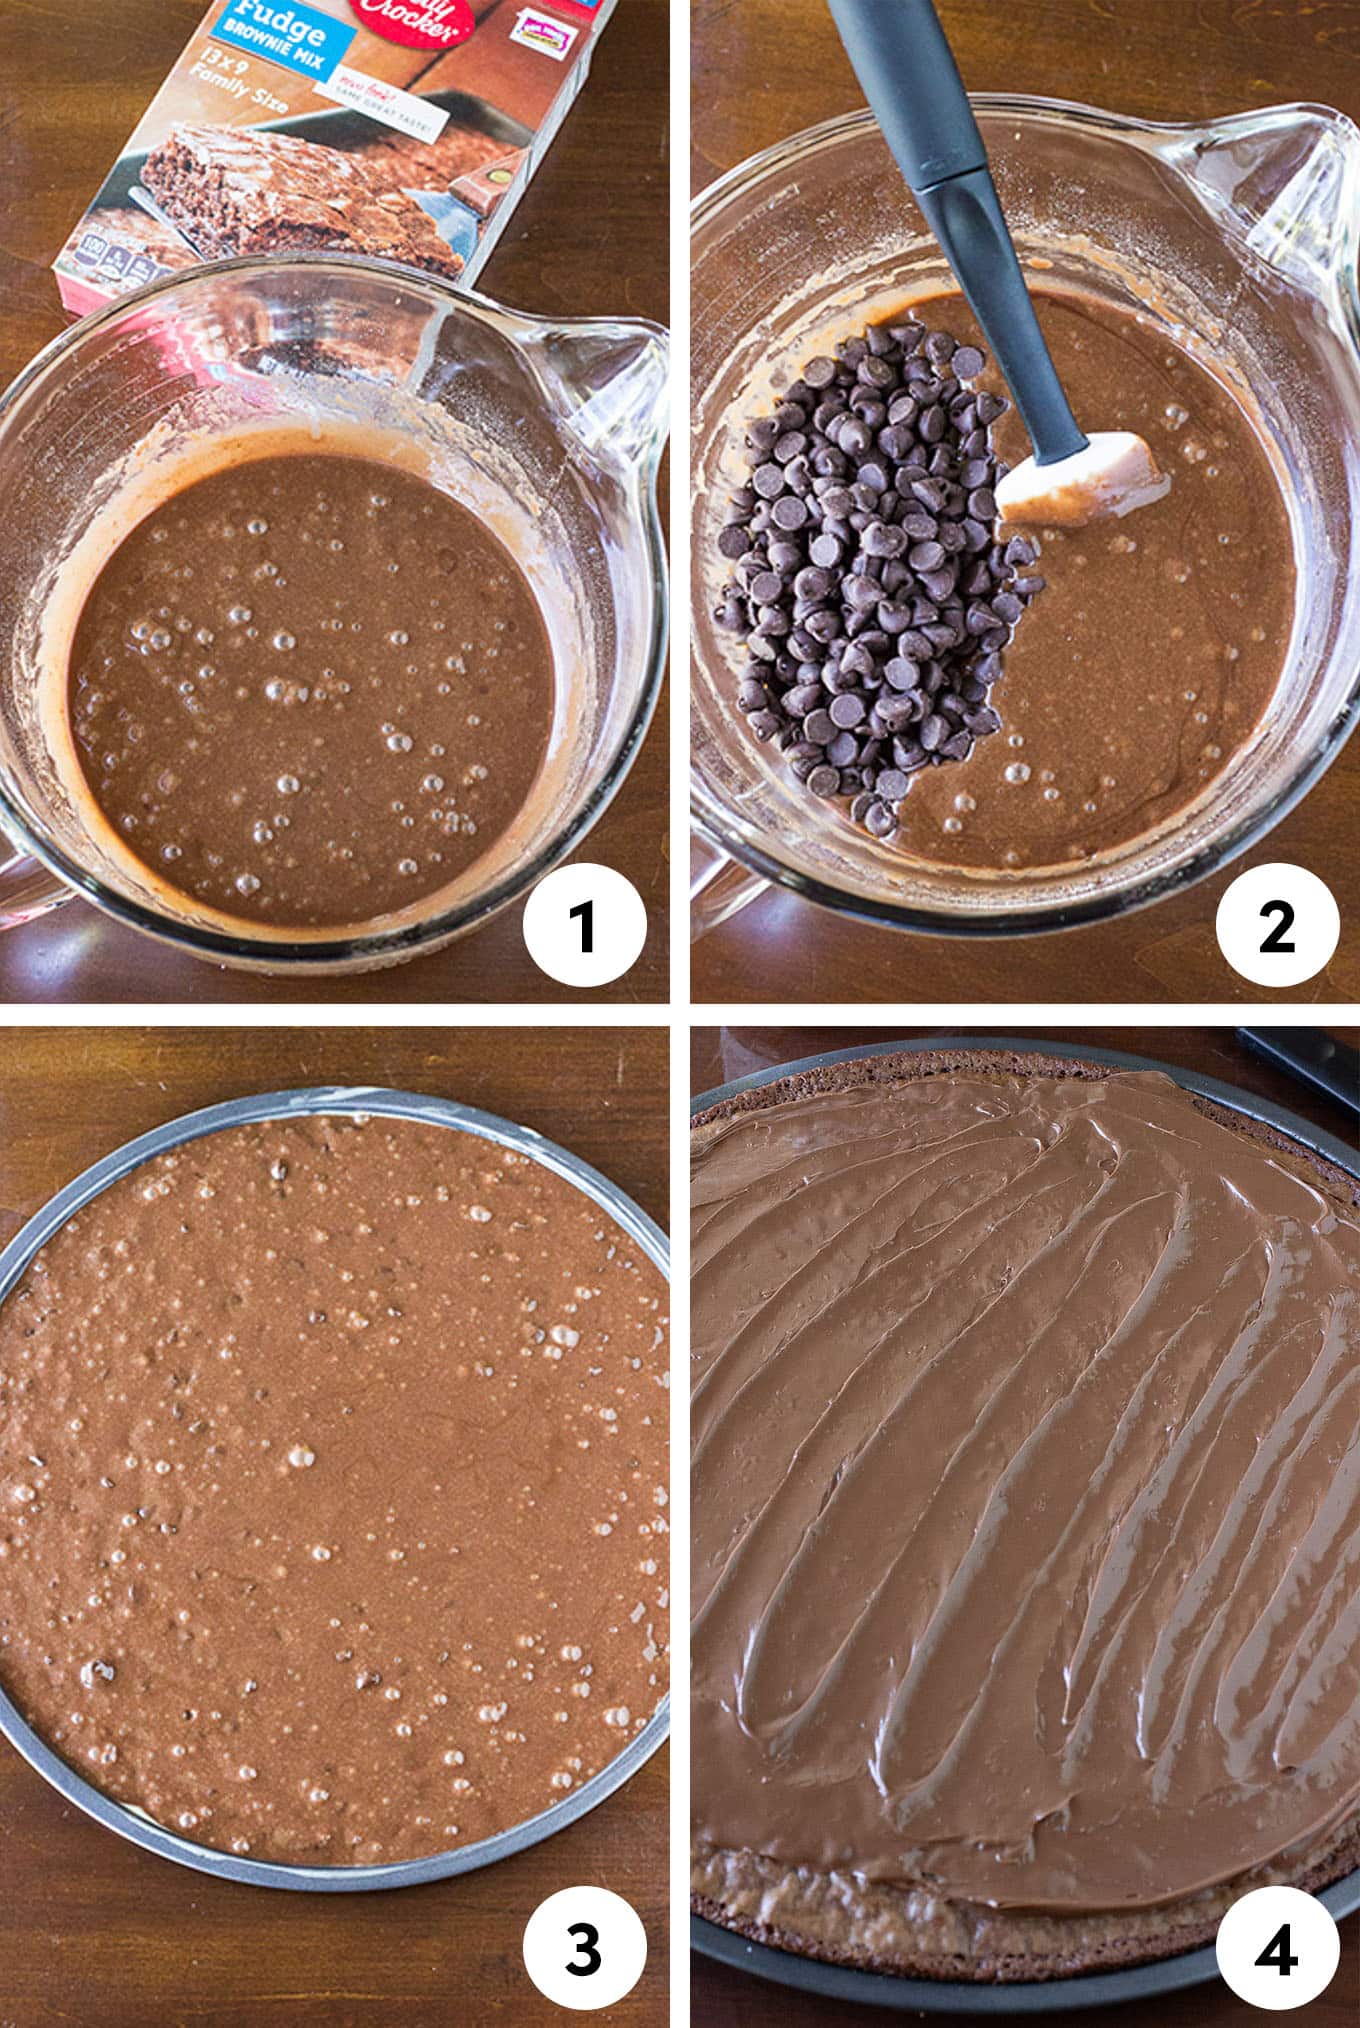 Collage of images showing how to mix up the brownie dessert pizza from mixing the brownie batter, adding the chocolate chips, in the pan, and topped with Nutella.